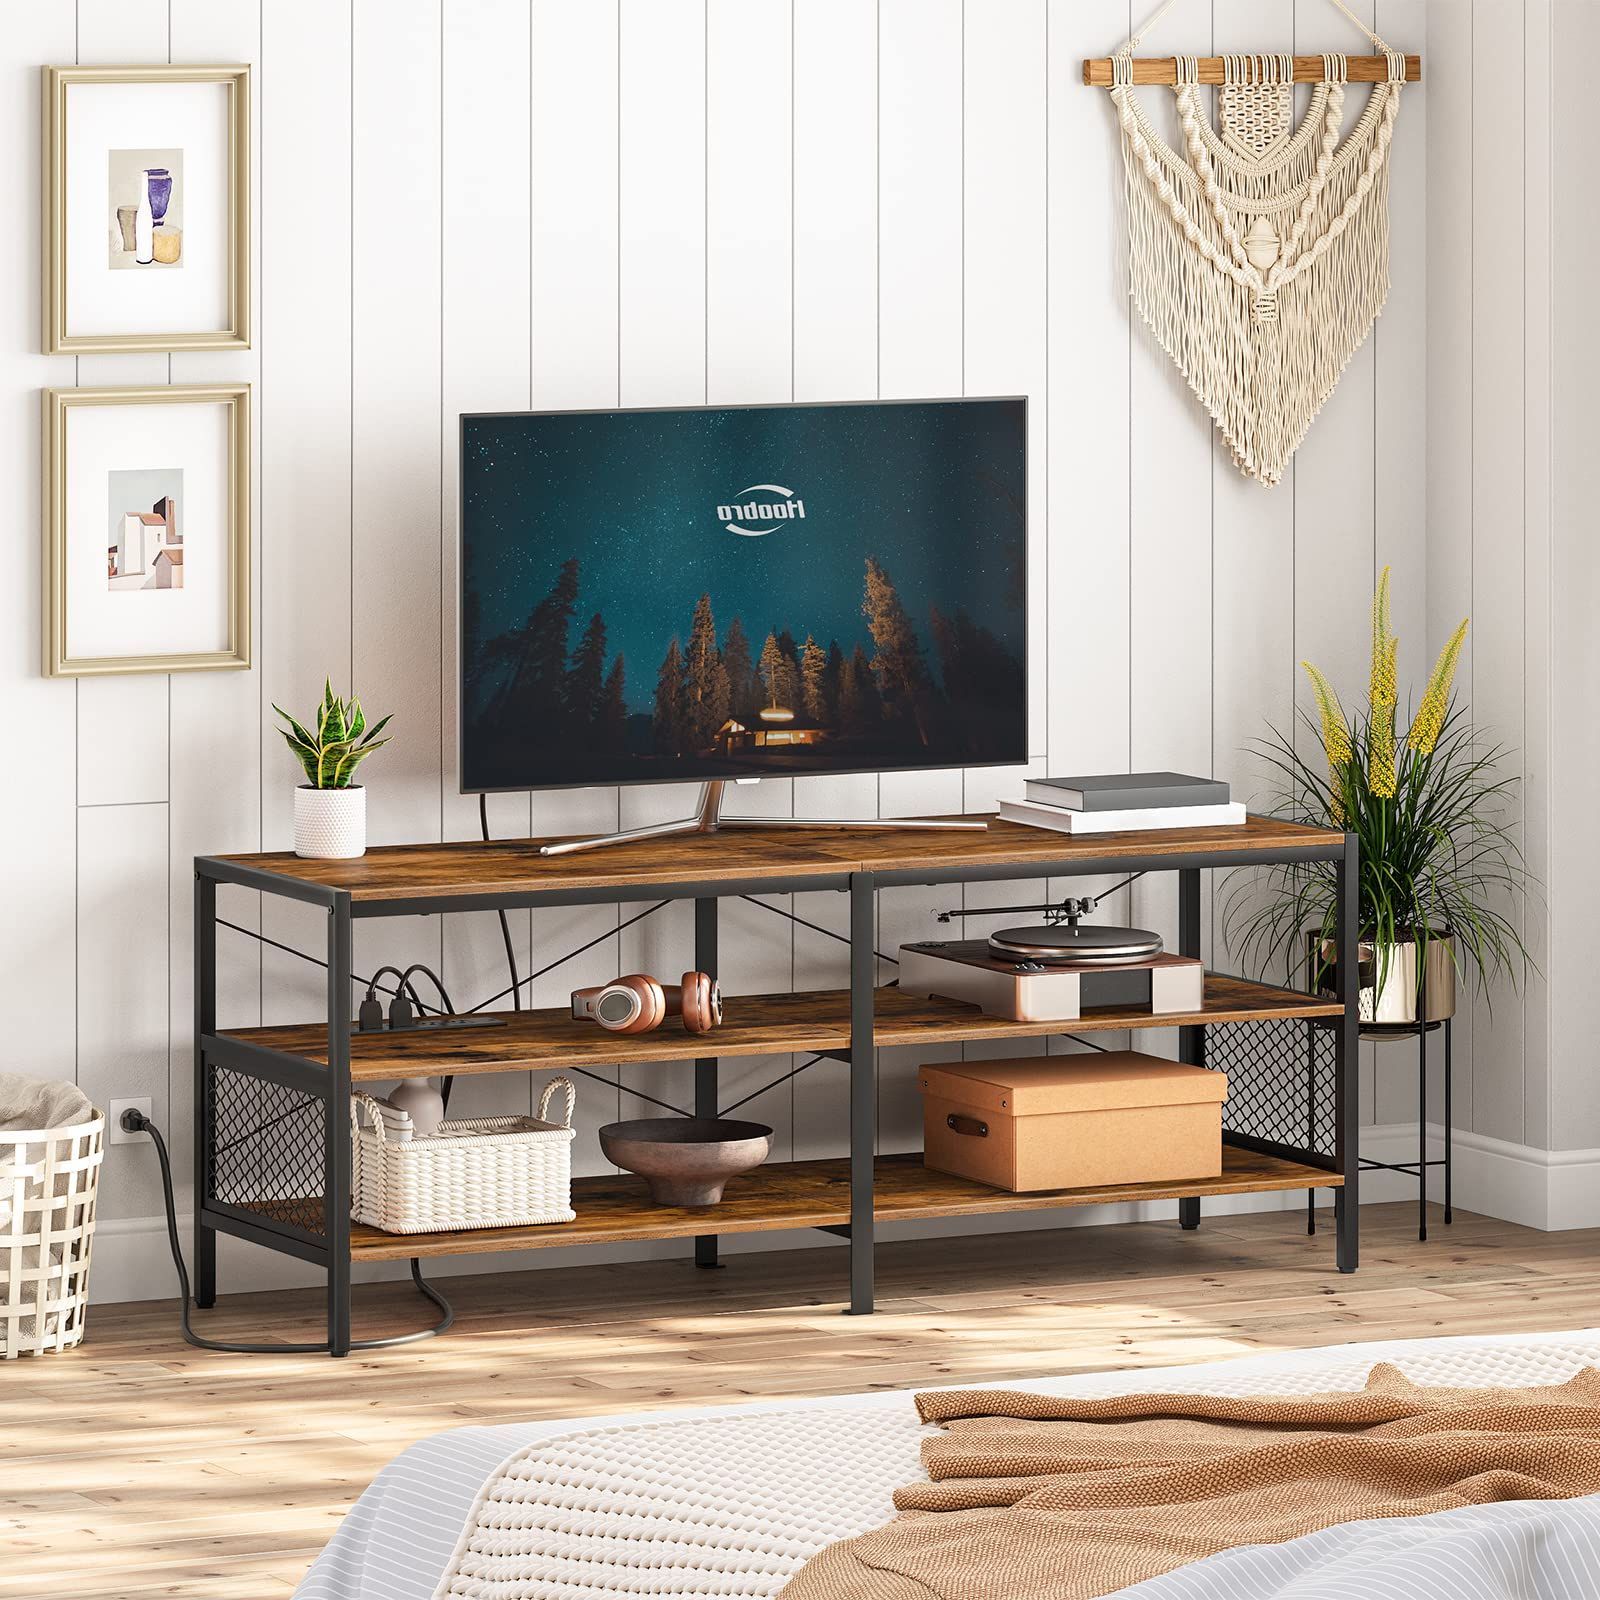 Tv Stands With Charging Station Intended For Most Recent Amazon: Hoobro Tv Stand With Charging Station Tvs Up To 65 Inches,  3 Tier Media Tv Console Table With Open Storage Shelves, Industrial Tv  Entertainment Center For Living Room, Bedroom, Rustic Brown Bf142ds01 : (View 2 of 10)